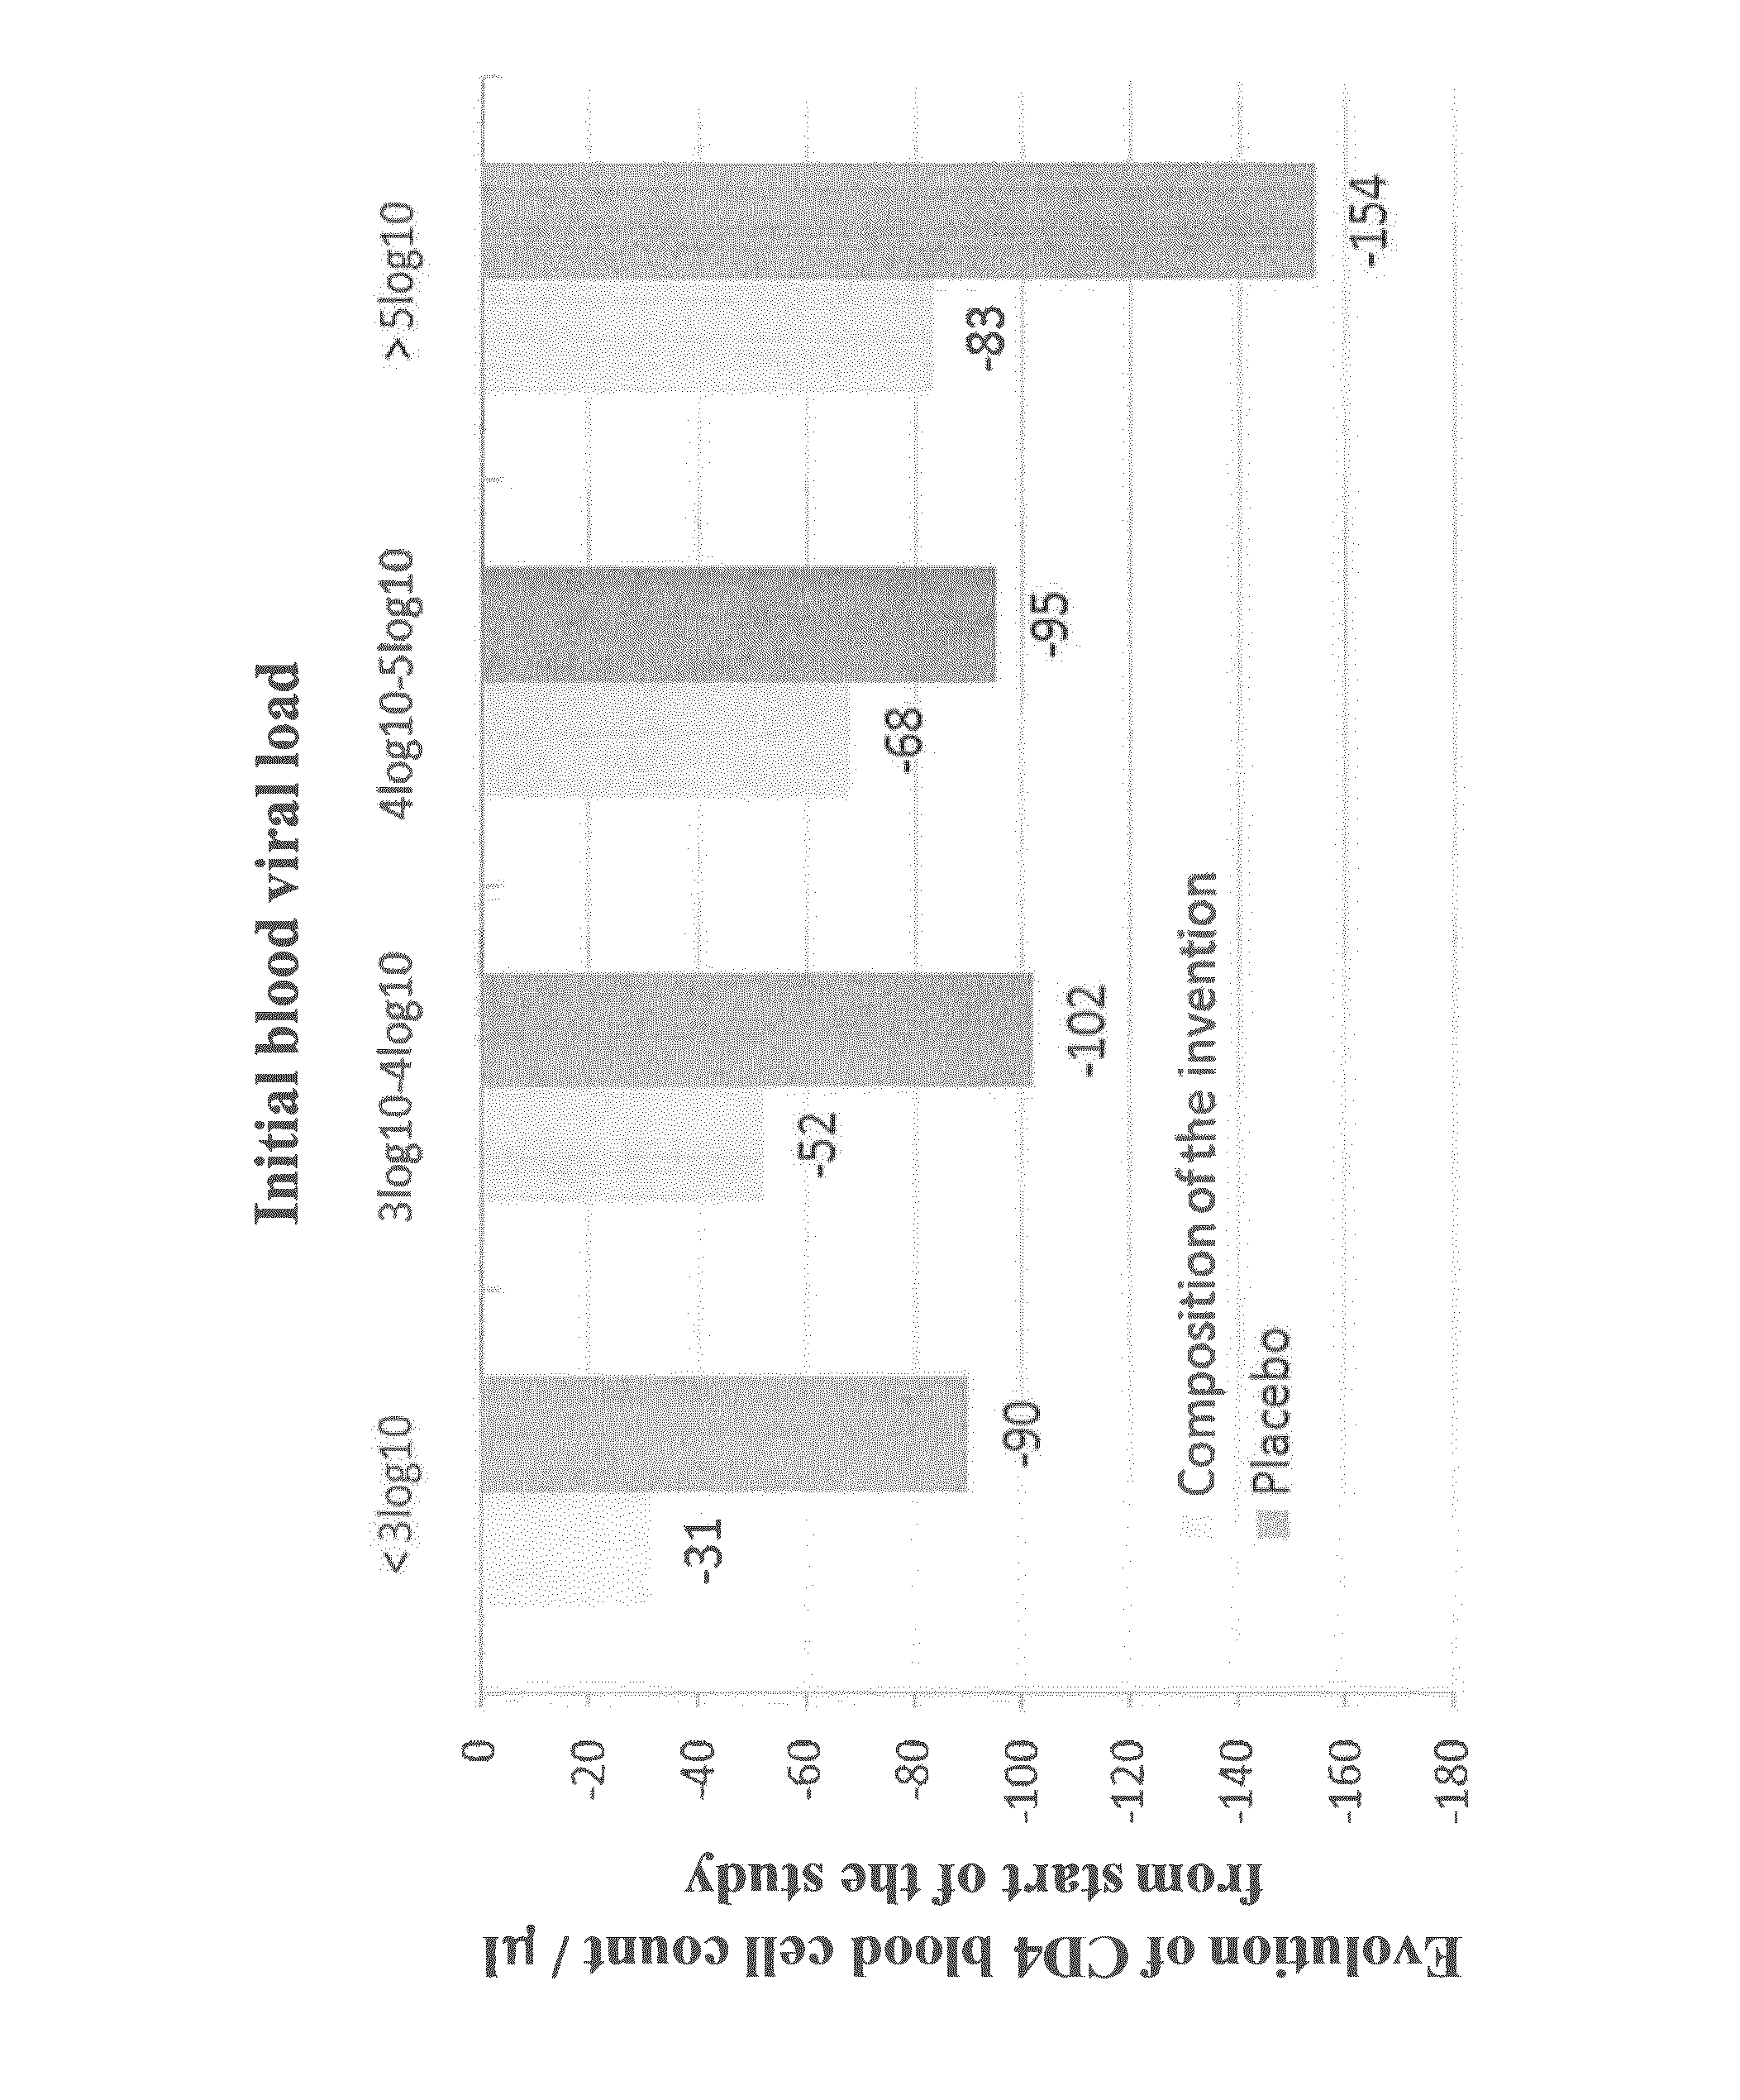 Composition for enhancing immunity